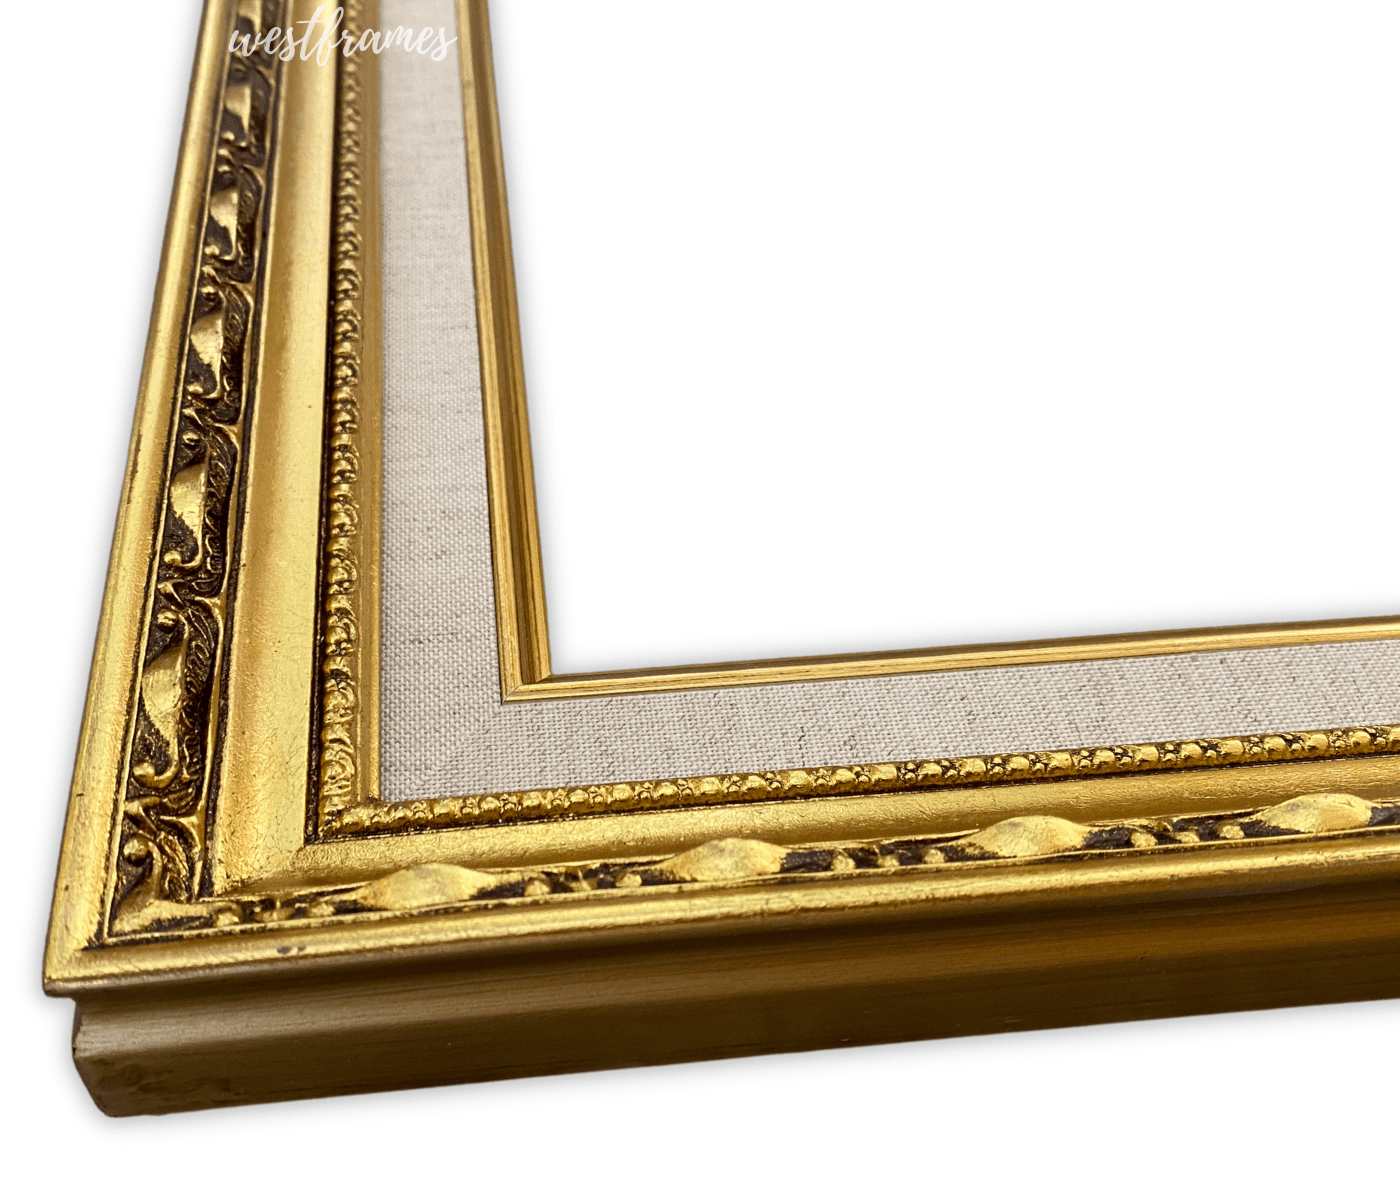  16x20 Ornate Gold Frames for Canvas, Baroque Art Wall